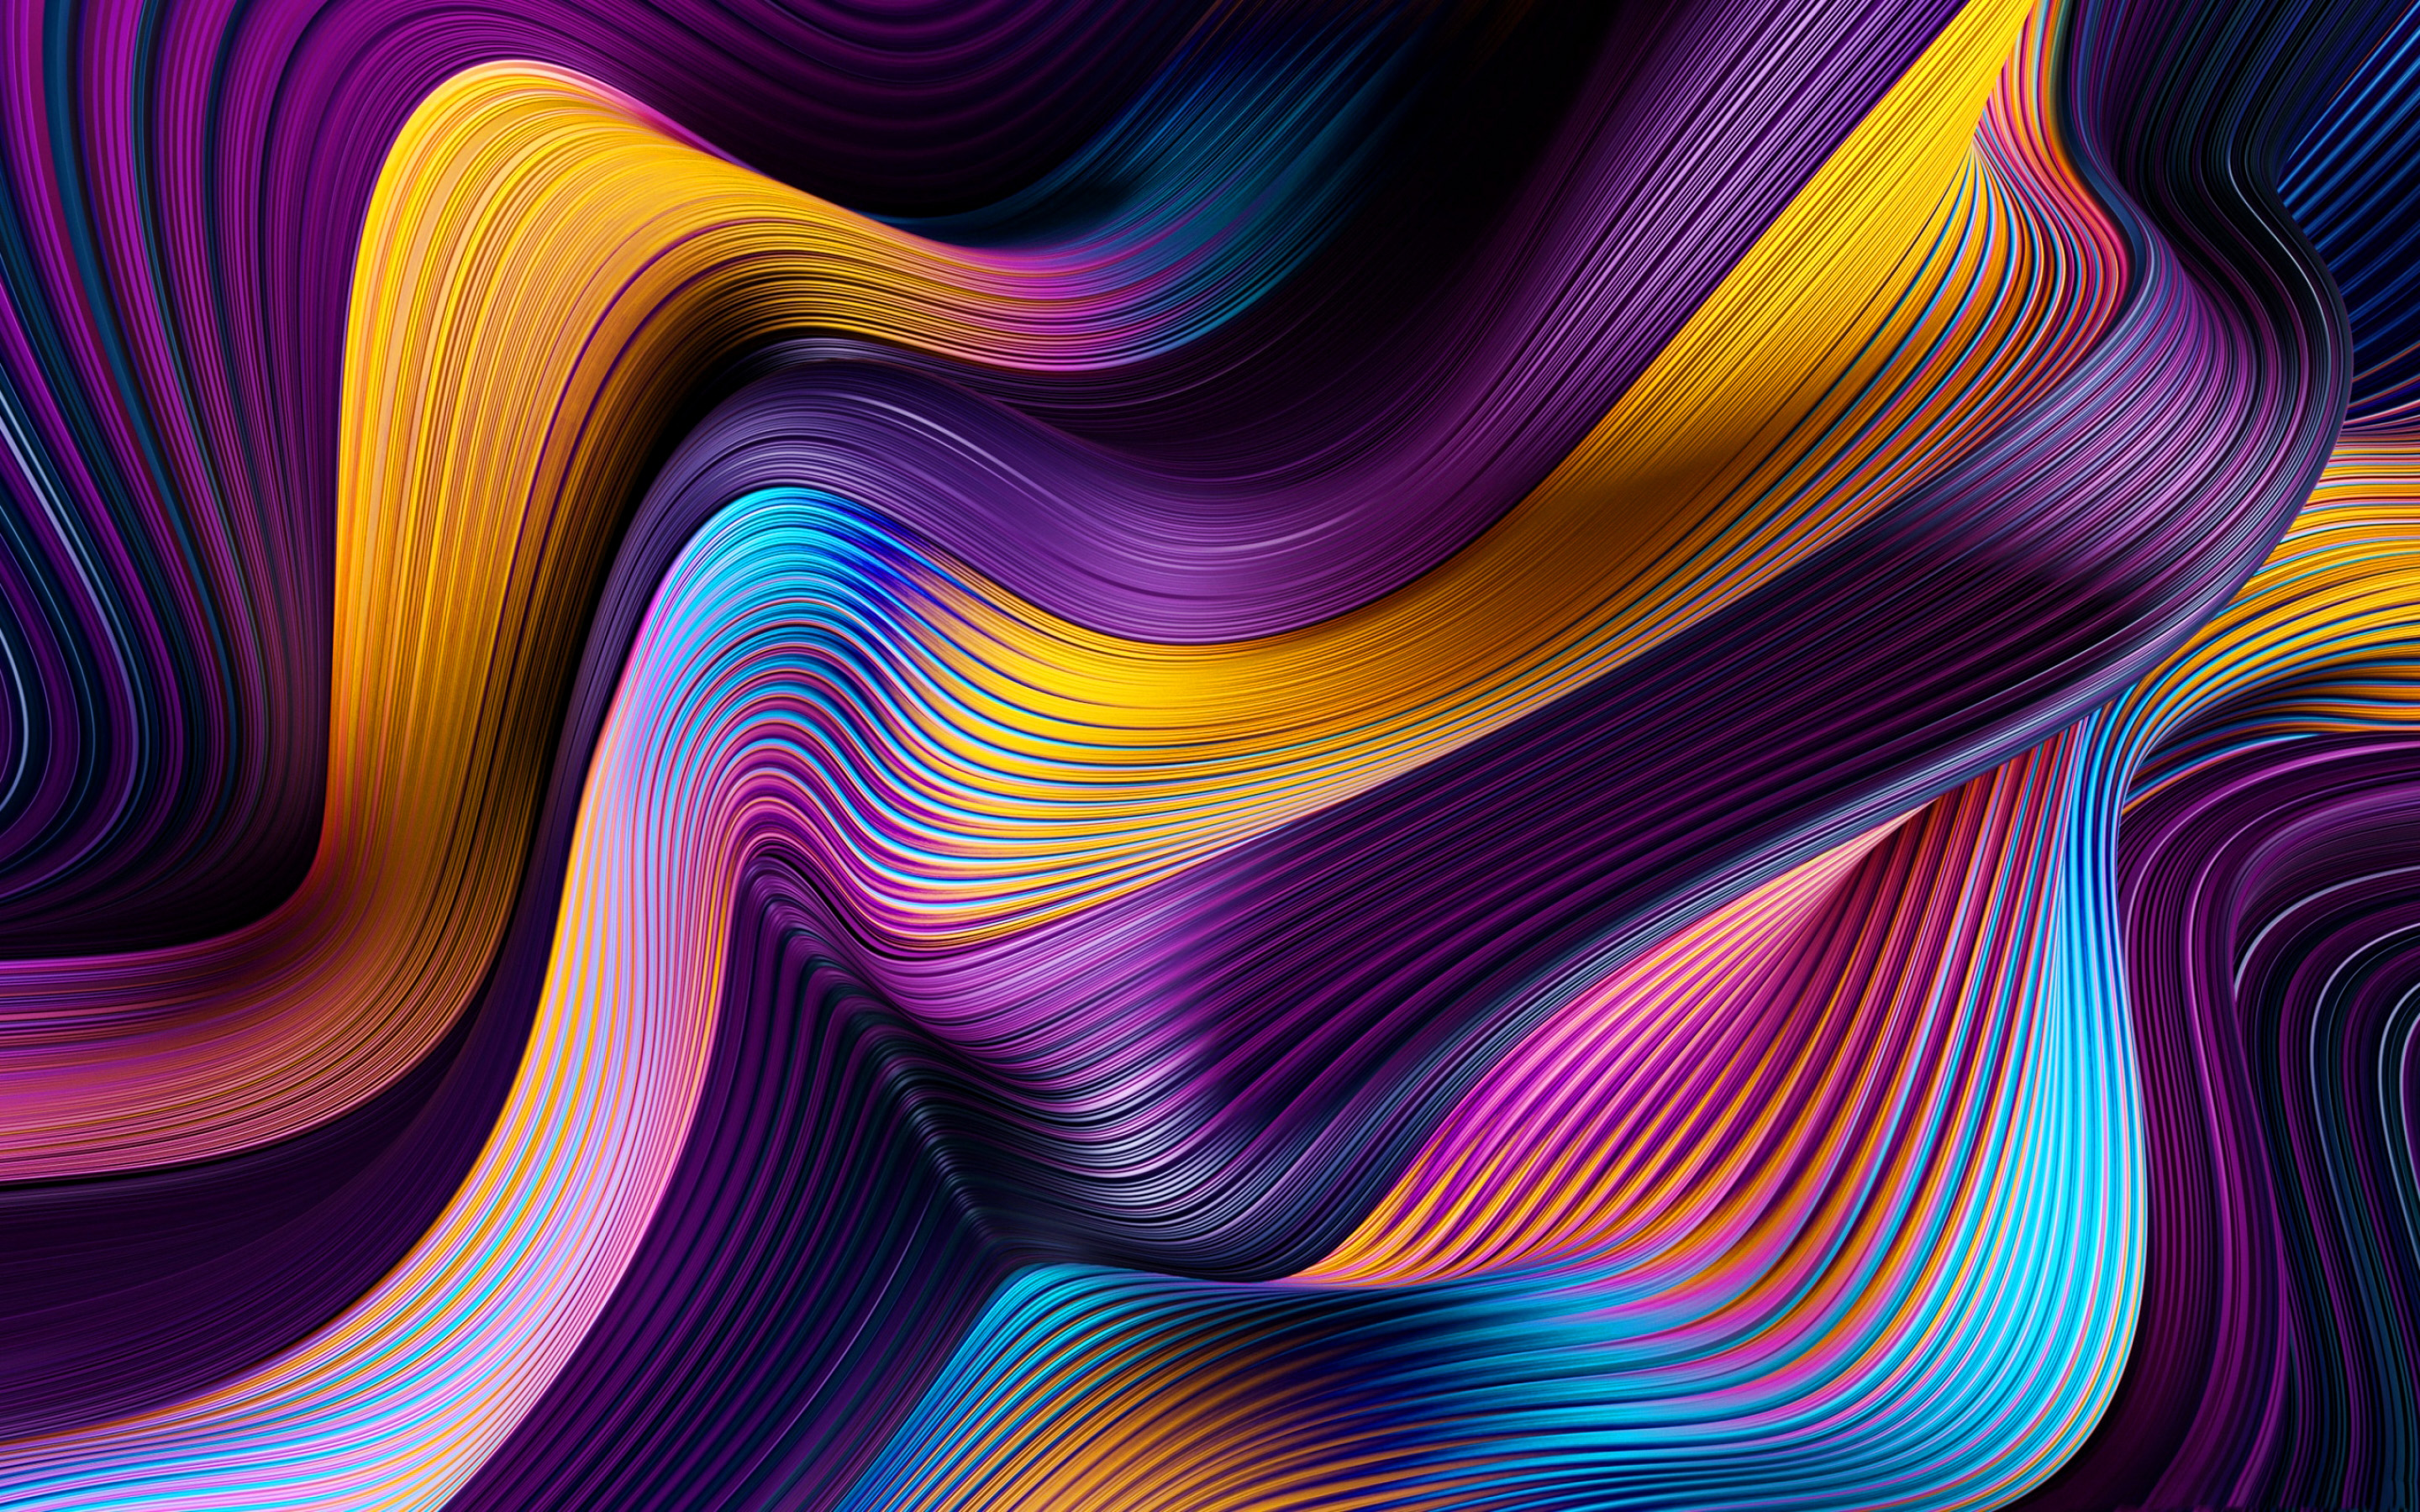 Download wallpapers abstract waves background, waves patterns, violet ...